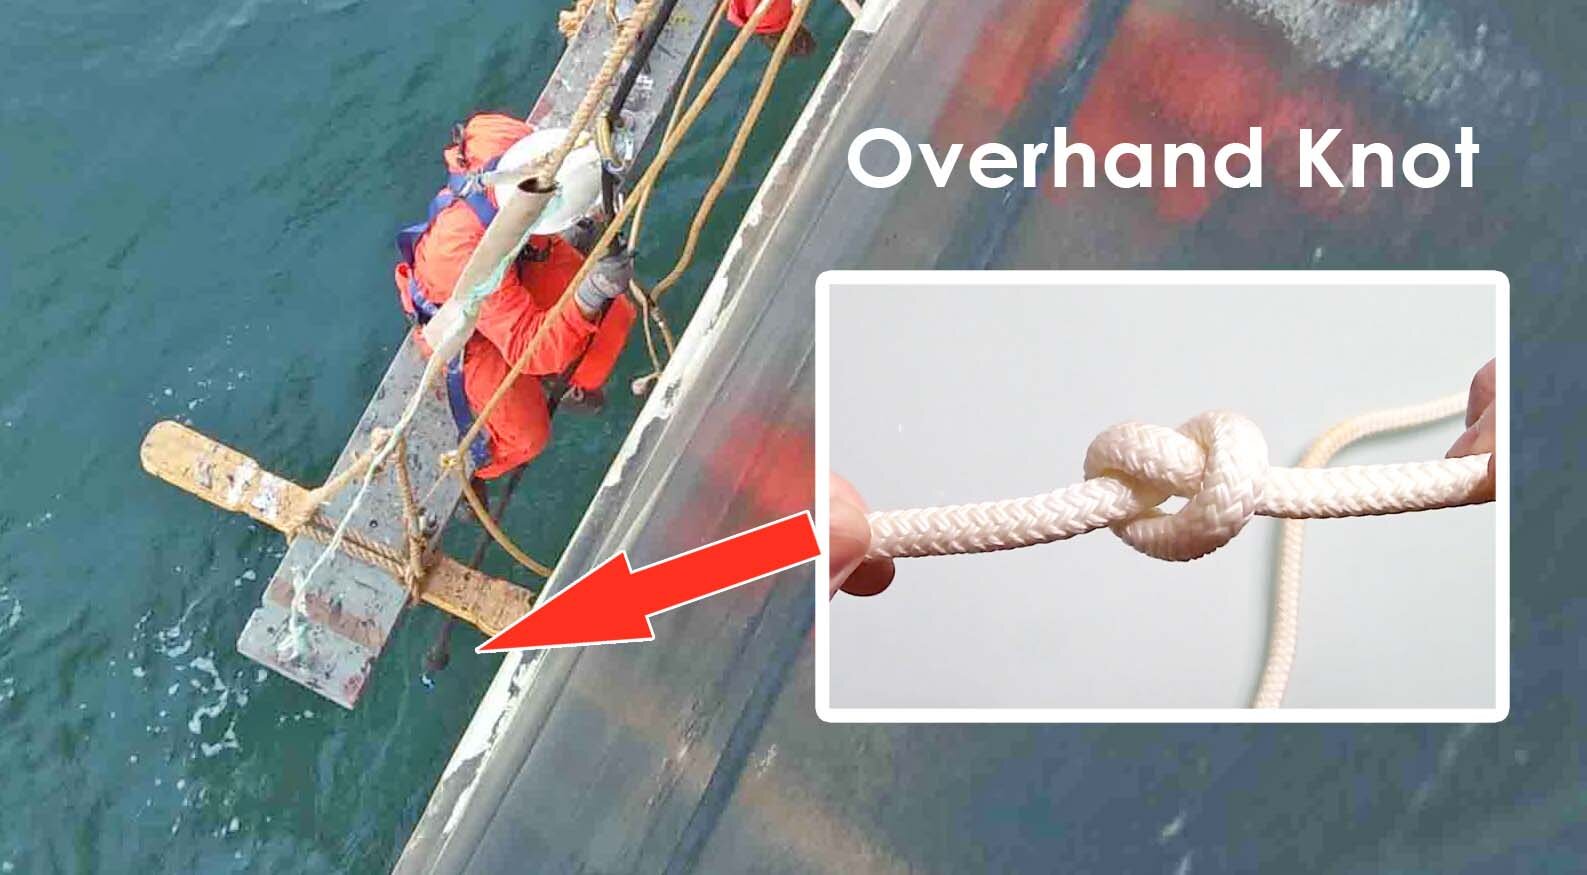 Overhand Knot tied at the end of the lifeline of a seafarer working over the side of the ship.